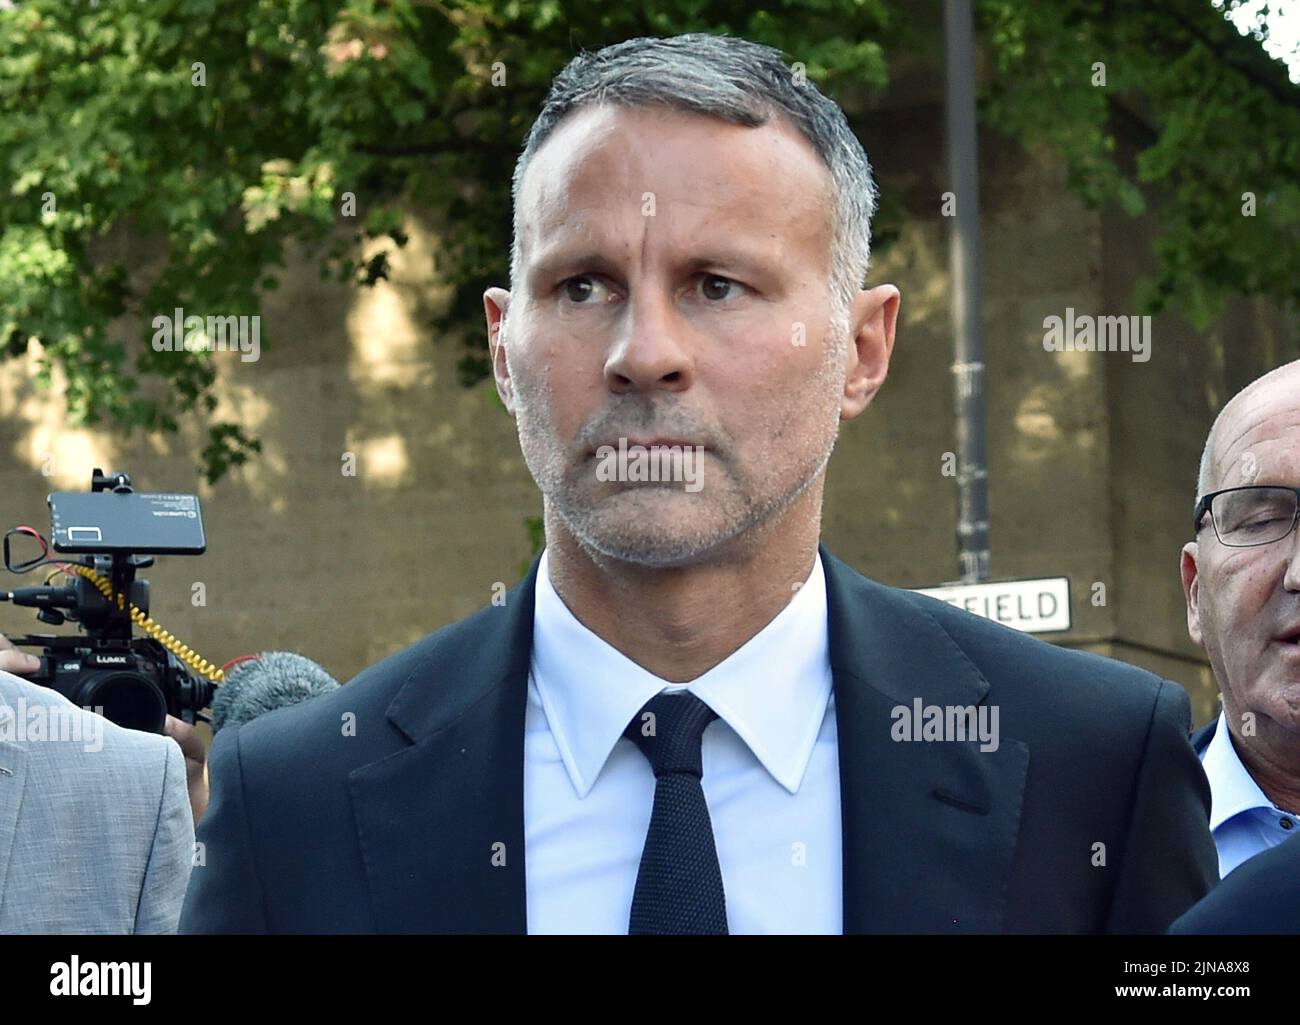 Former Manchester United footballer Ryan Giggs leaving Manchester Crown Court where he is accused of controlling and coercive behaviour against ex-girlfriend Kate Greville between August 2017 and November 2020. Picture date: Wednesday August 10, 2022. Stock Photo